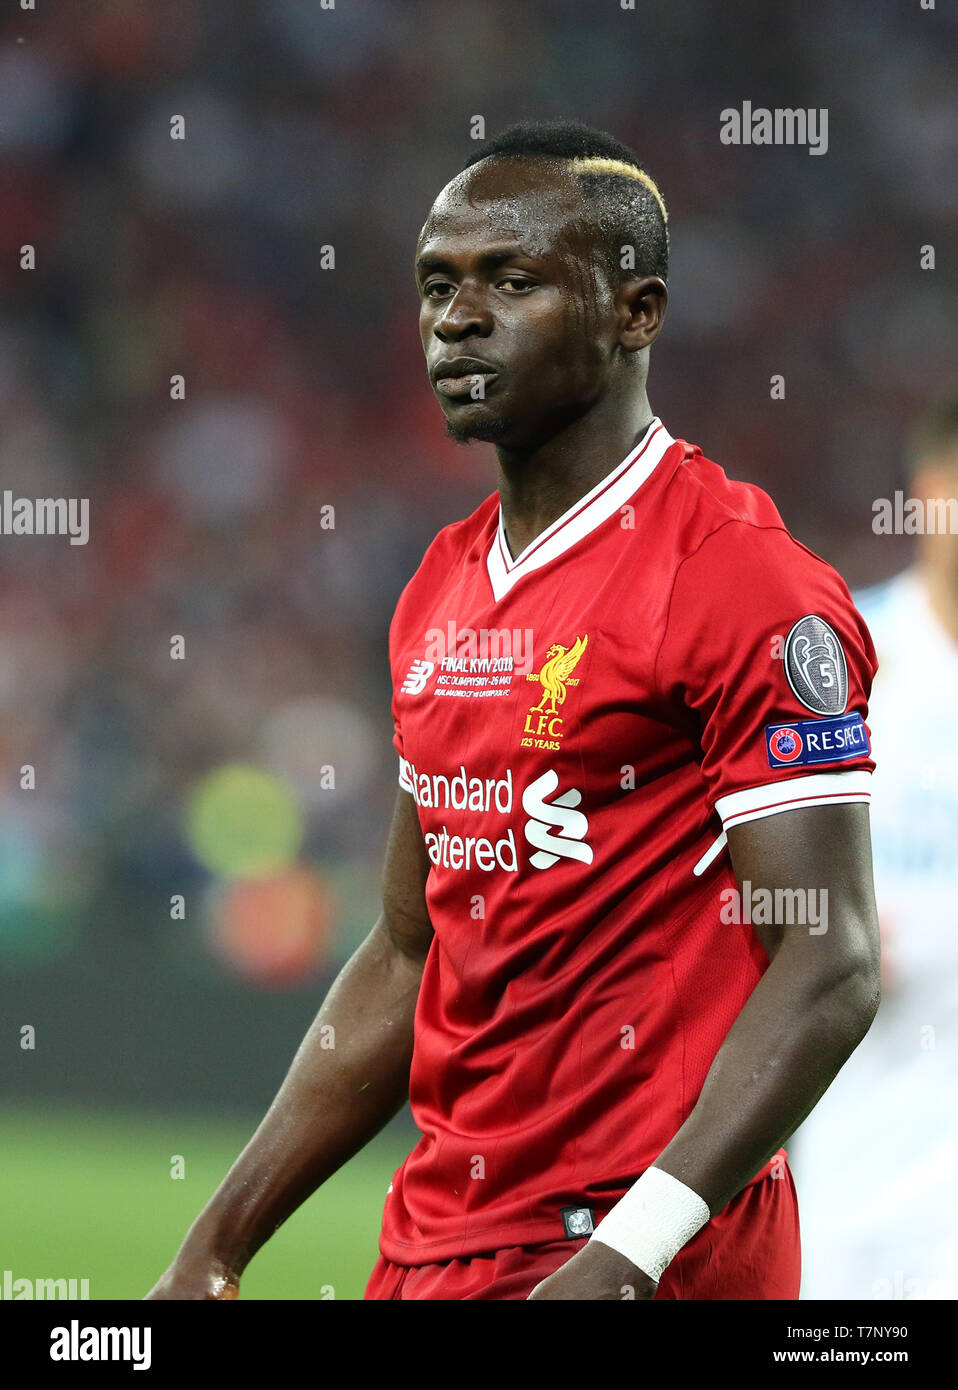 Sadio Mane of Liverpool during the UEFA Champions League Final 2018 game against Real Madrid Stock Photo